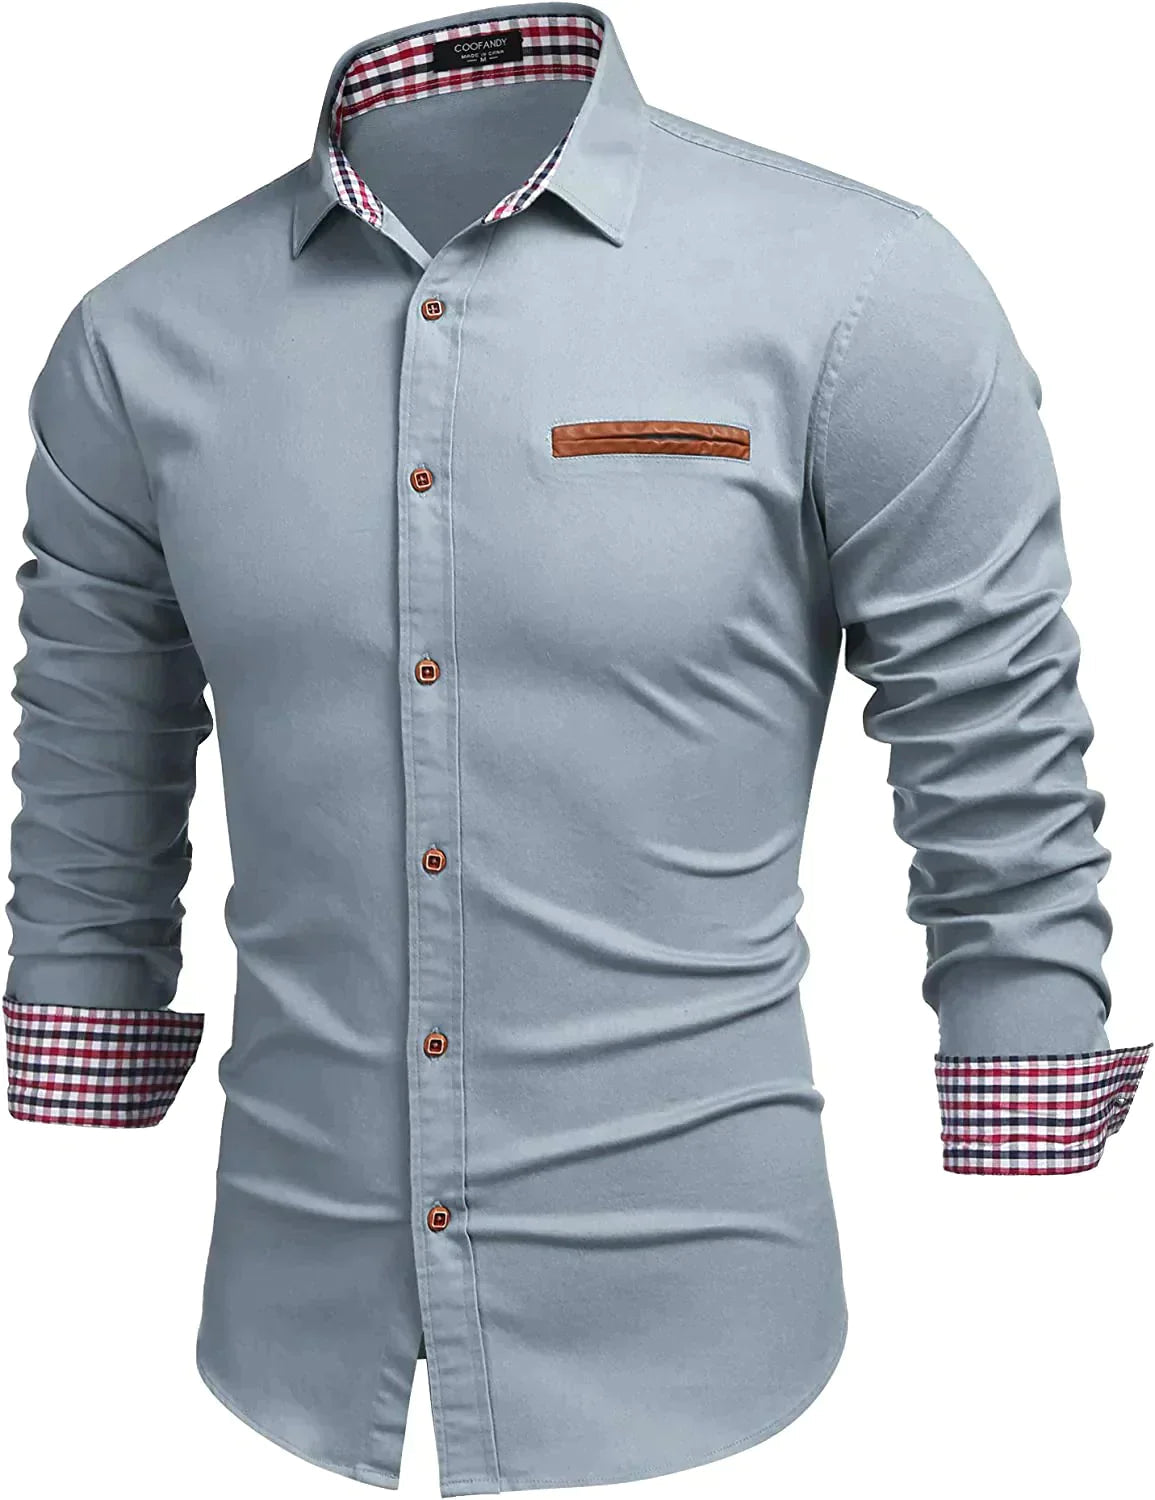 Casual Long Sleeve Button Denim Shirt (US Only) Shirts COOFANDY Store Light Grey S 